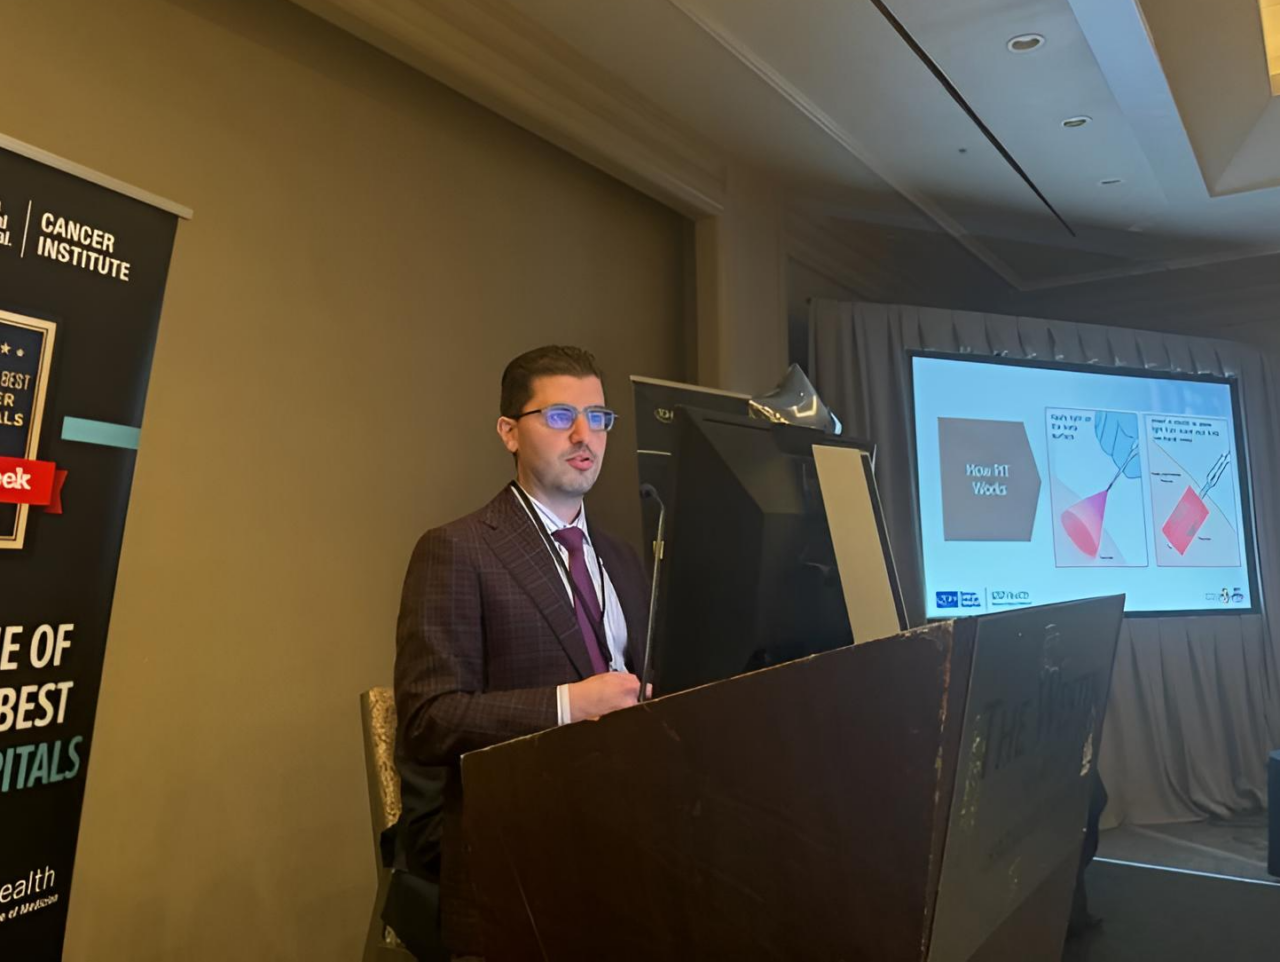 Matthew Mifsud: I had a great time last night discussing our open phase III photodynamic immunotherapy trial at the TGH Cancer Institute symposium on solid tumors